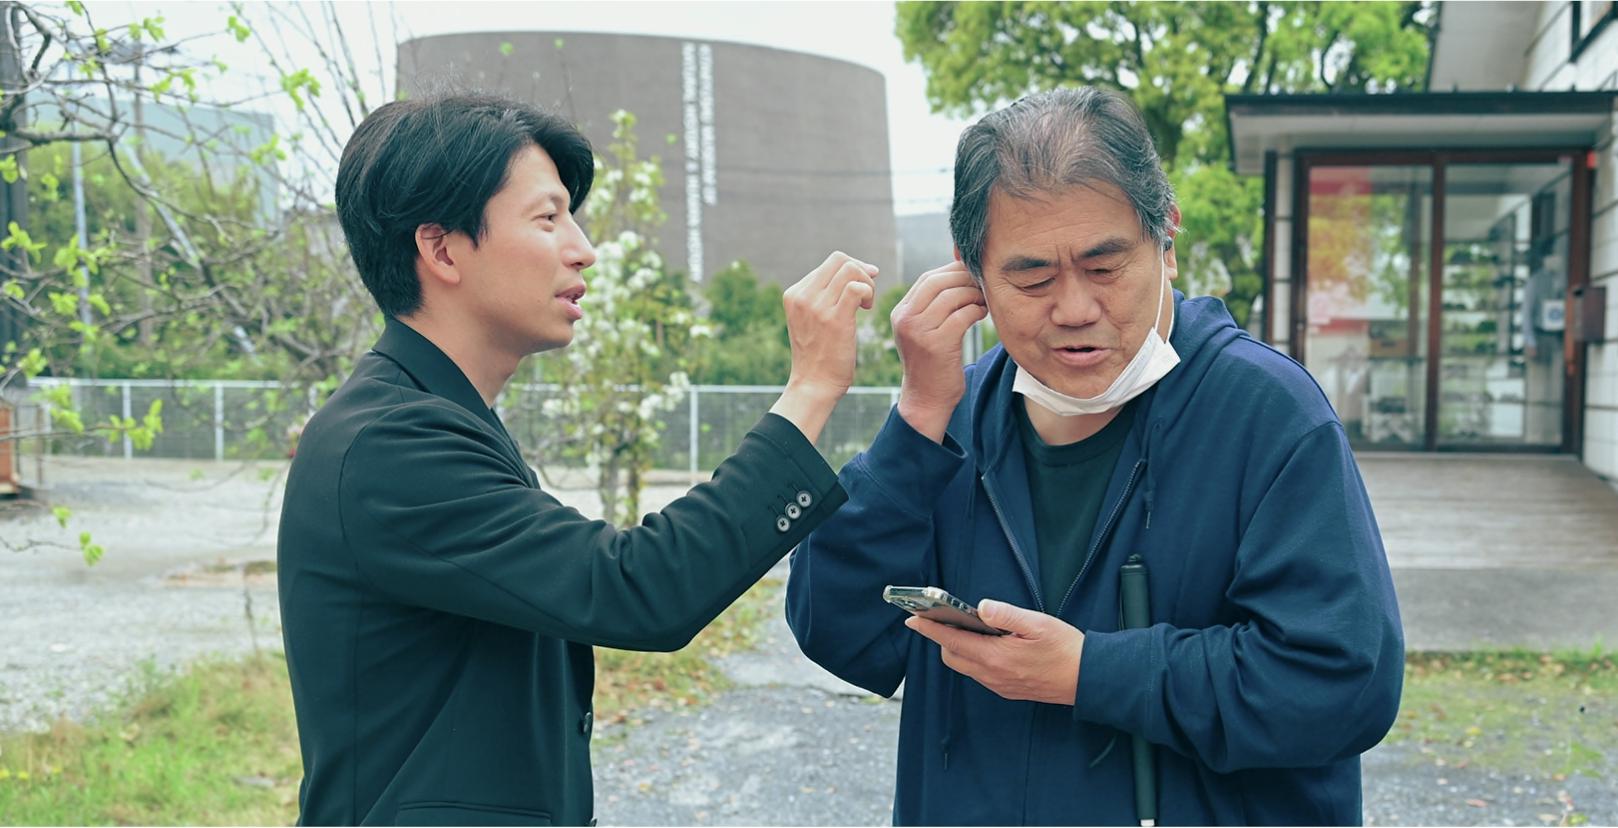 Shohei Takata is helping a male with visual impairments waring LinkBuds